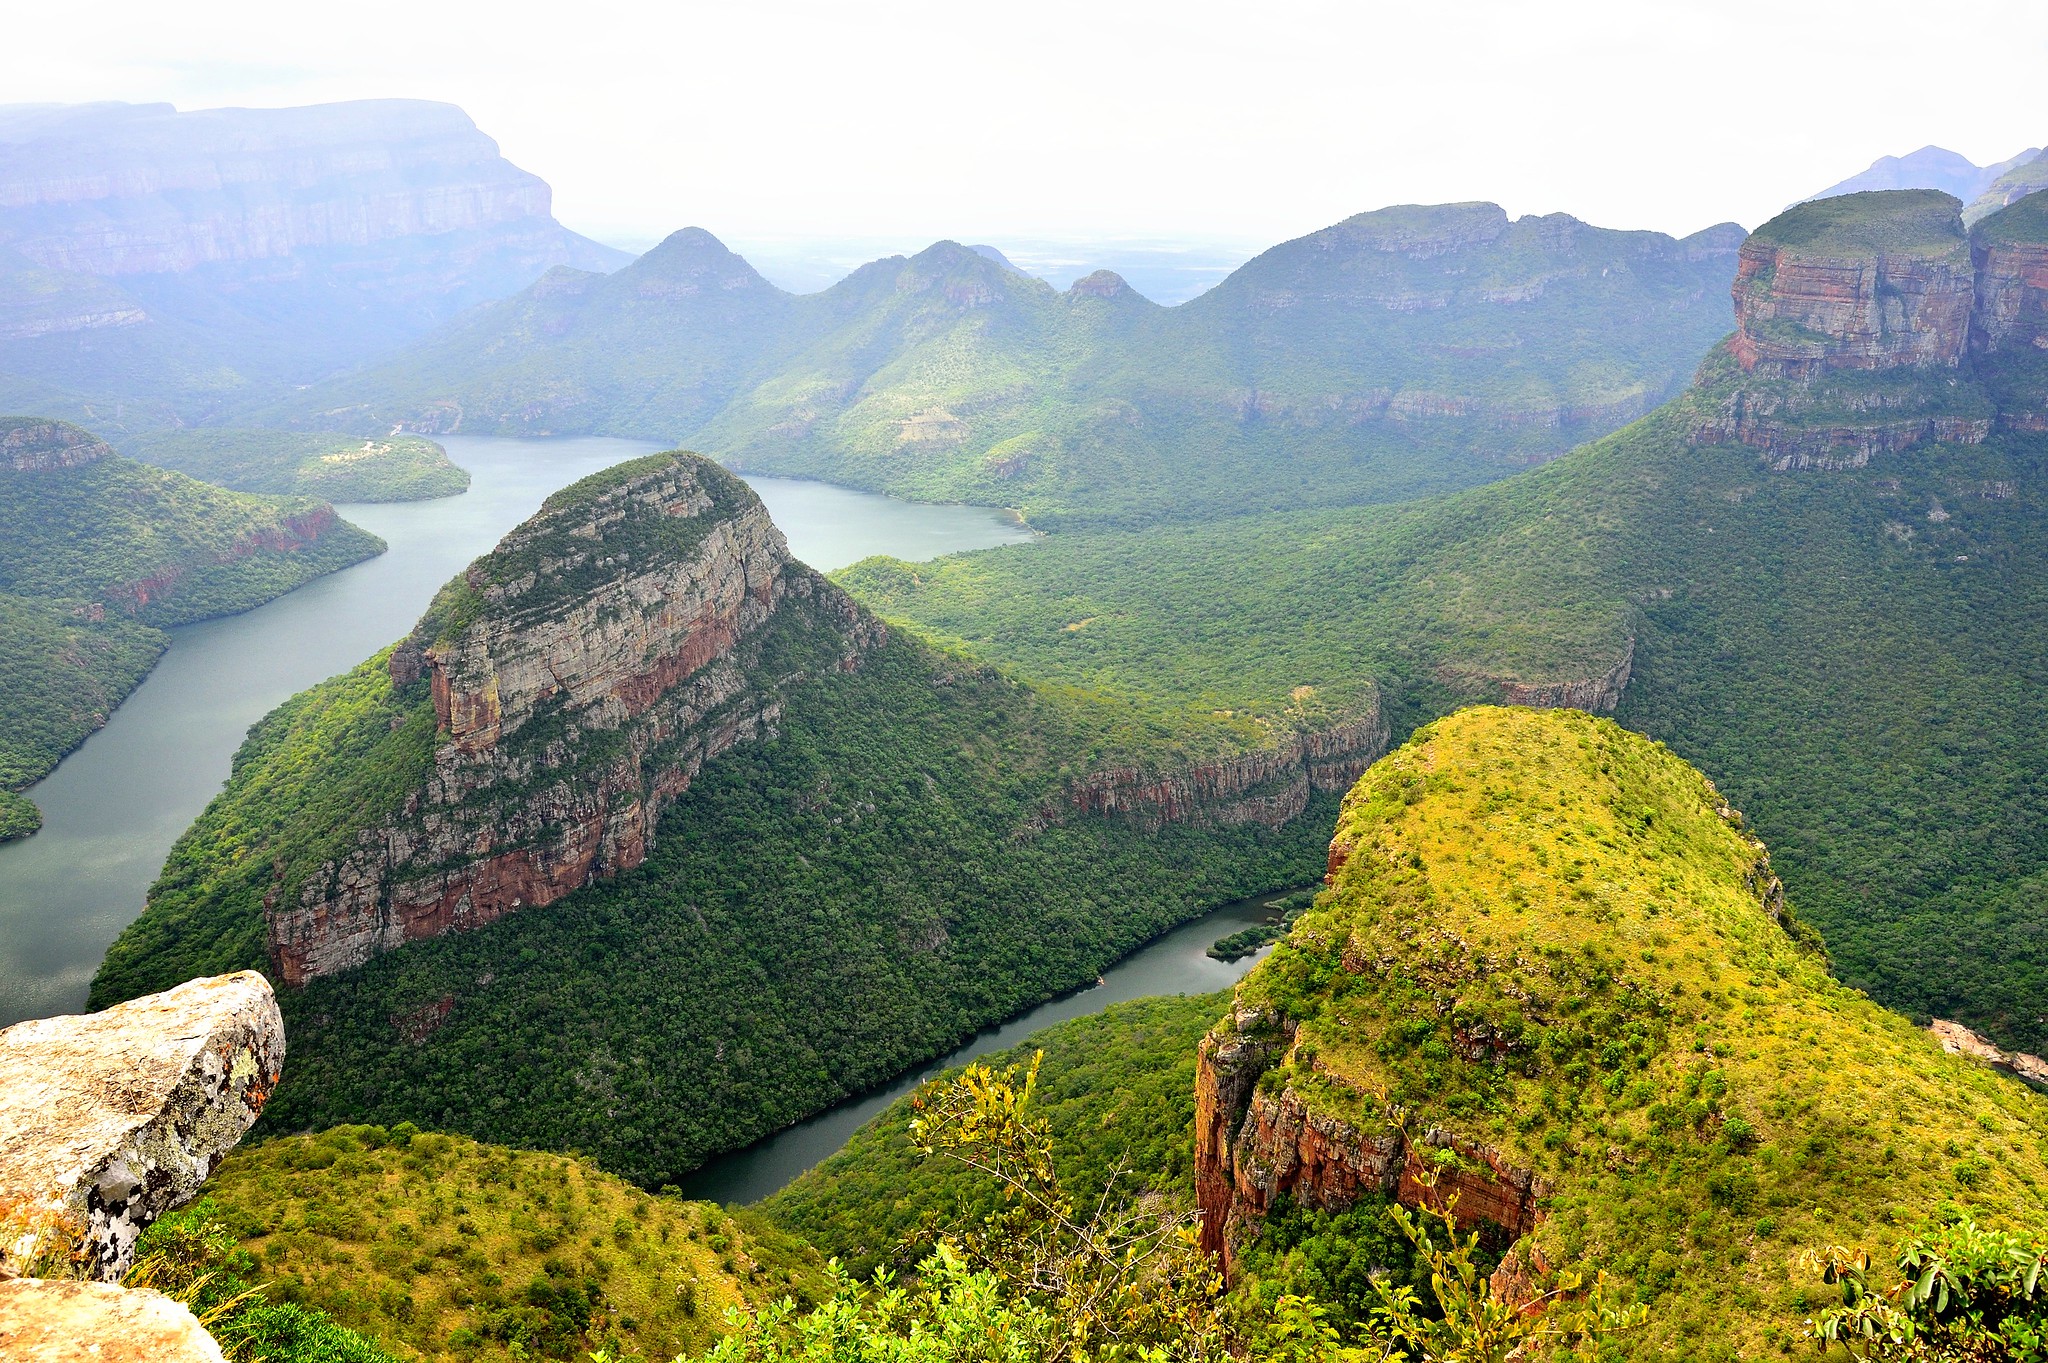 Blyde River Canyon
© Flickr user South African Tourism